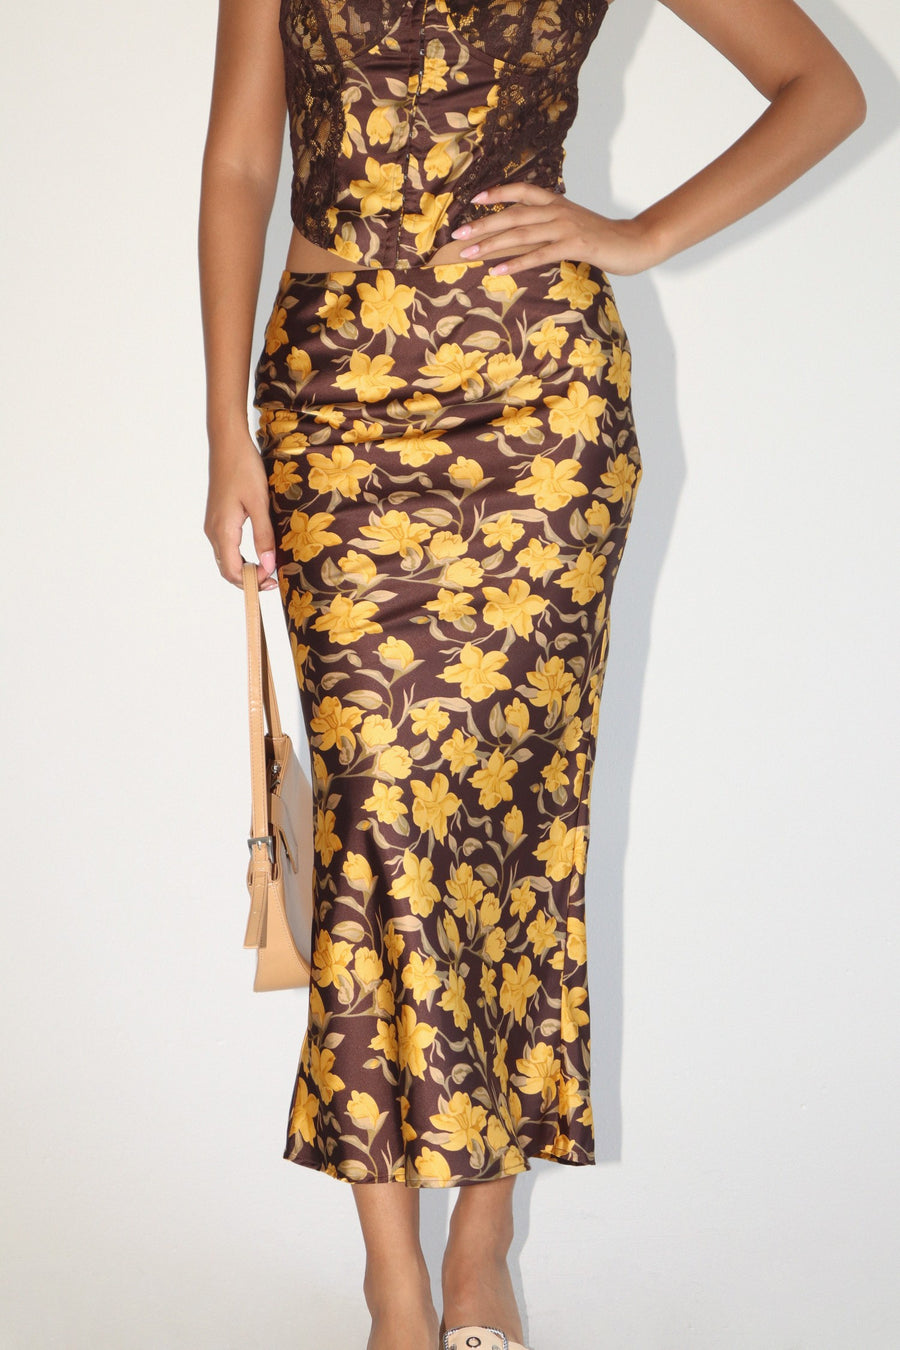 Midi skirt in the color brown with satin floral print. 